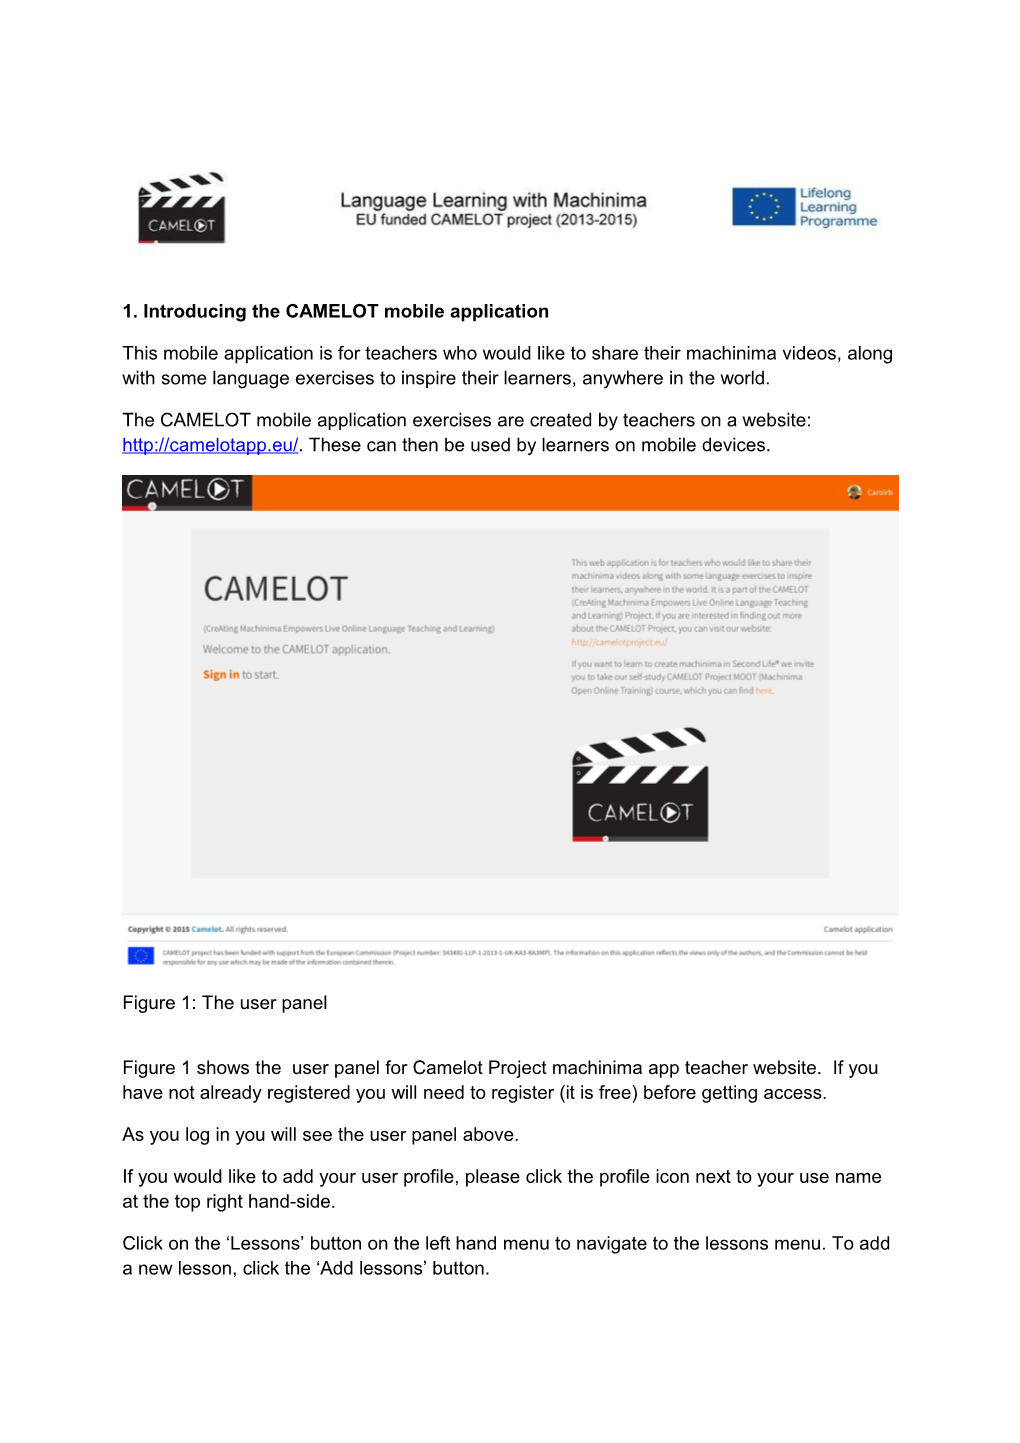 1. Introducing the CAMELOT Mobile Application